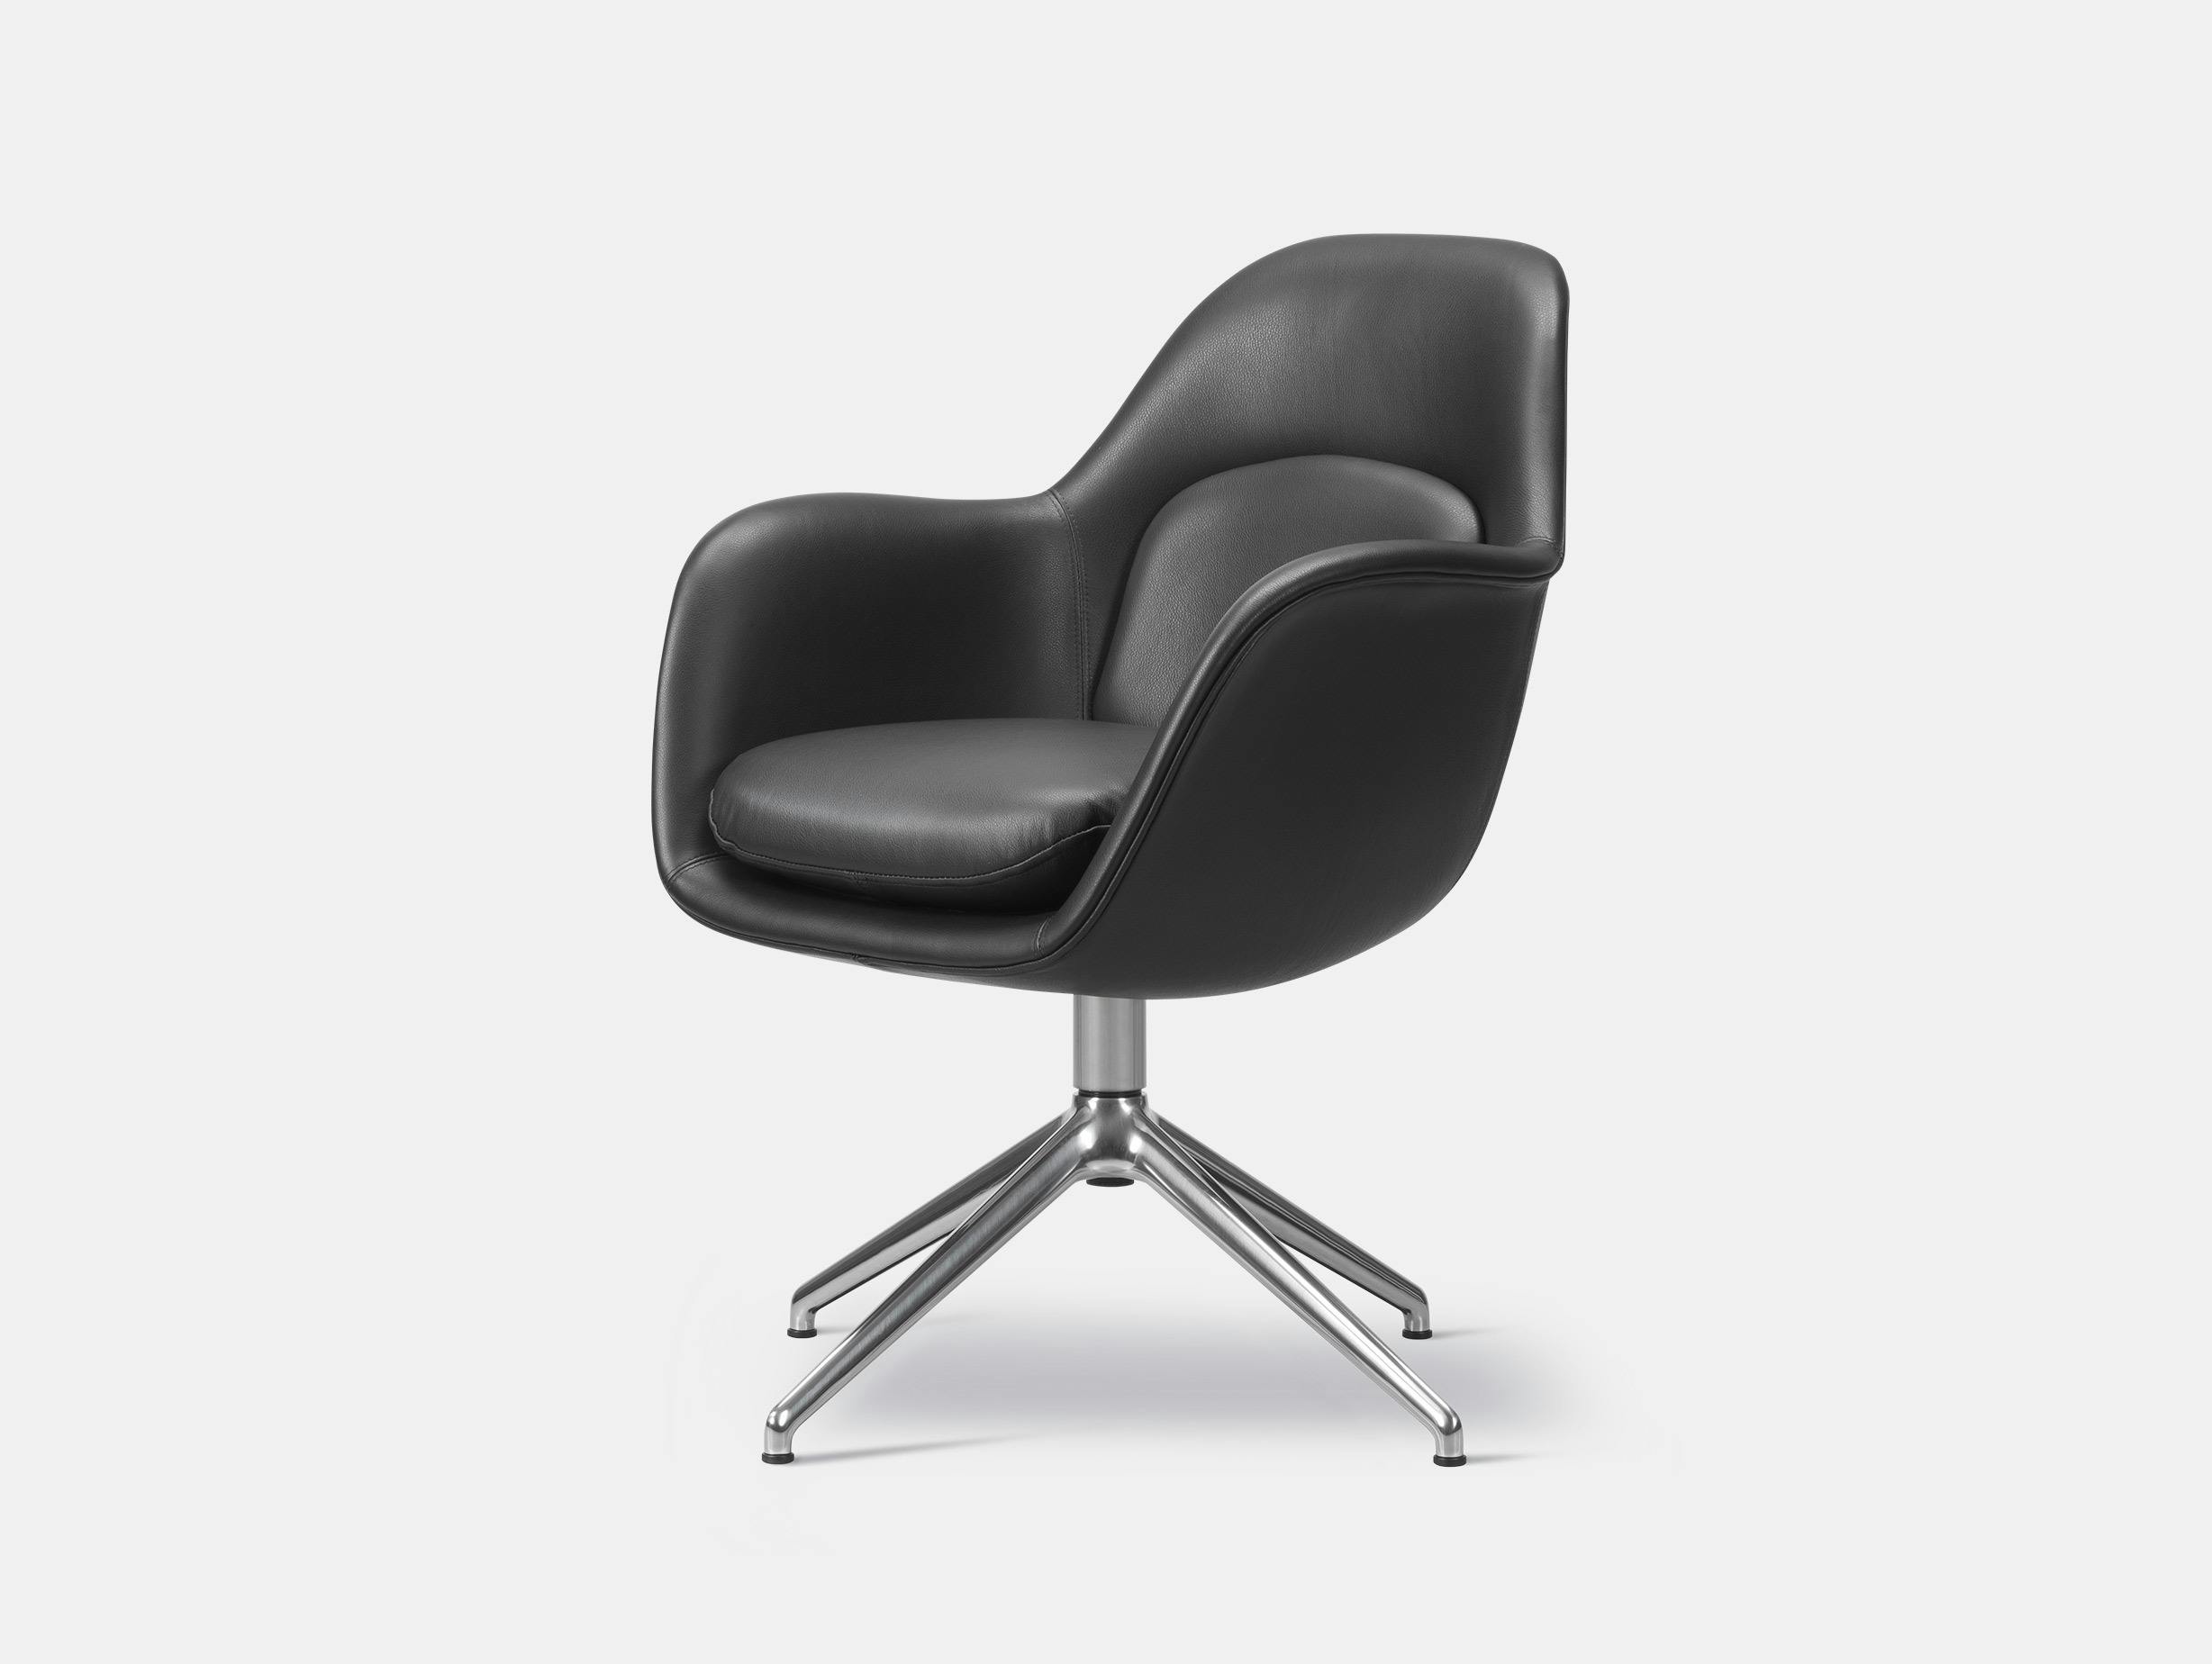 Fredericia dining chair swivel base carlotto 404 6